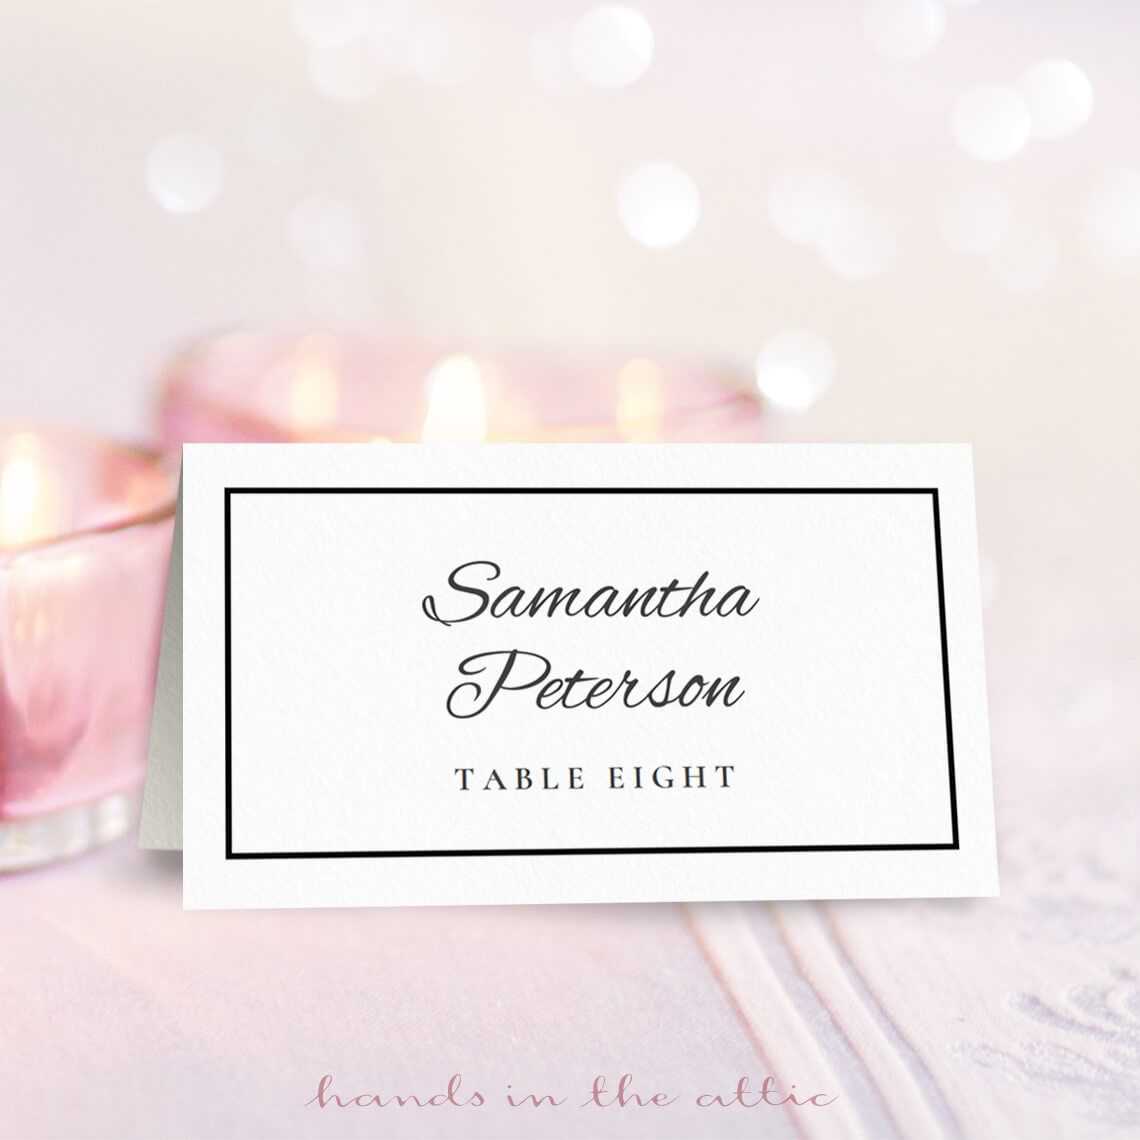 001 Free Place Card Template Excellent Ideas Tent Templates Regarding Place Card Template 6 Per Sheet